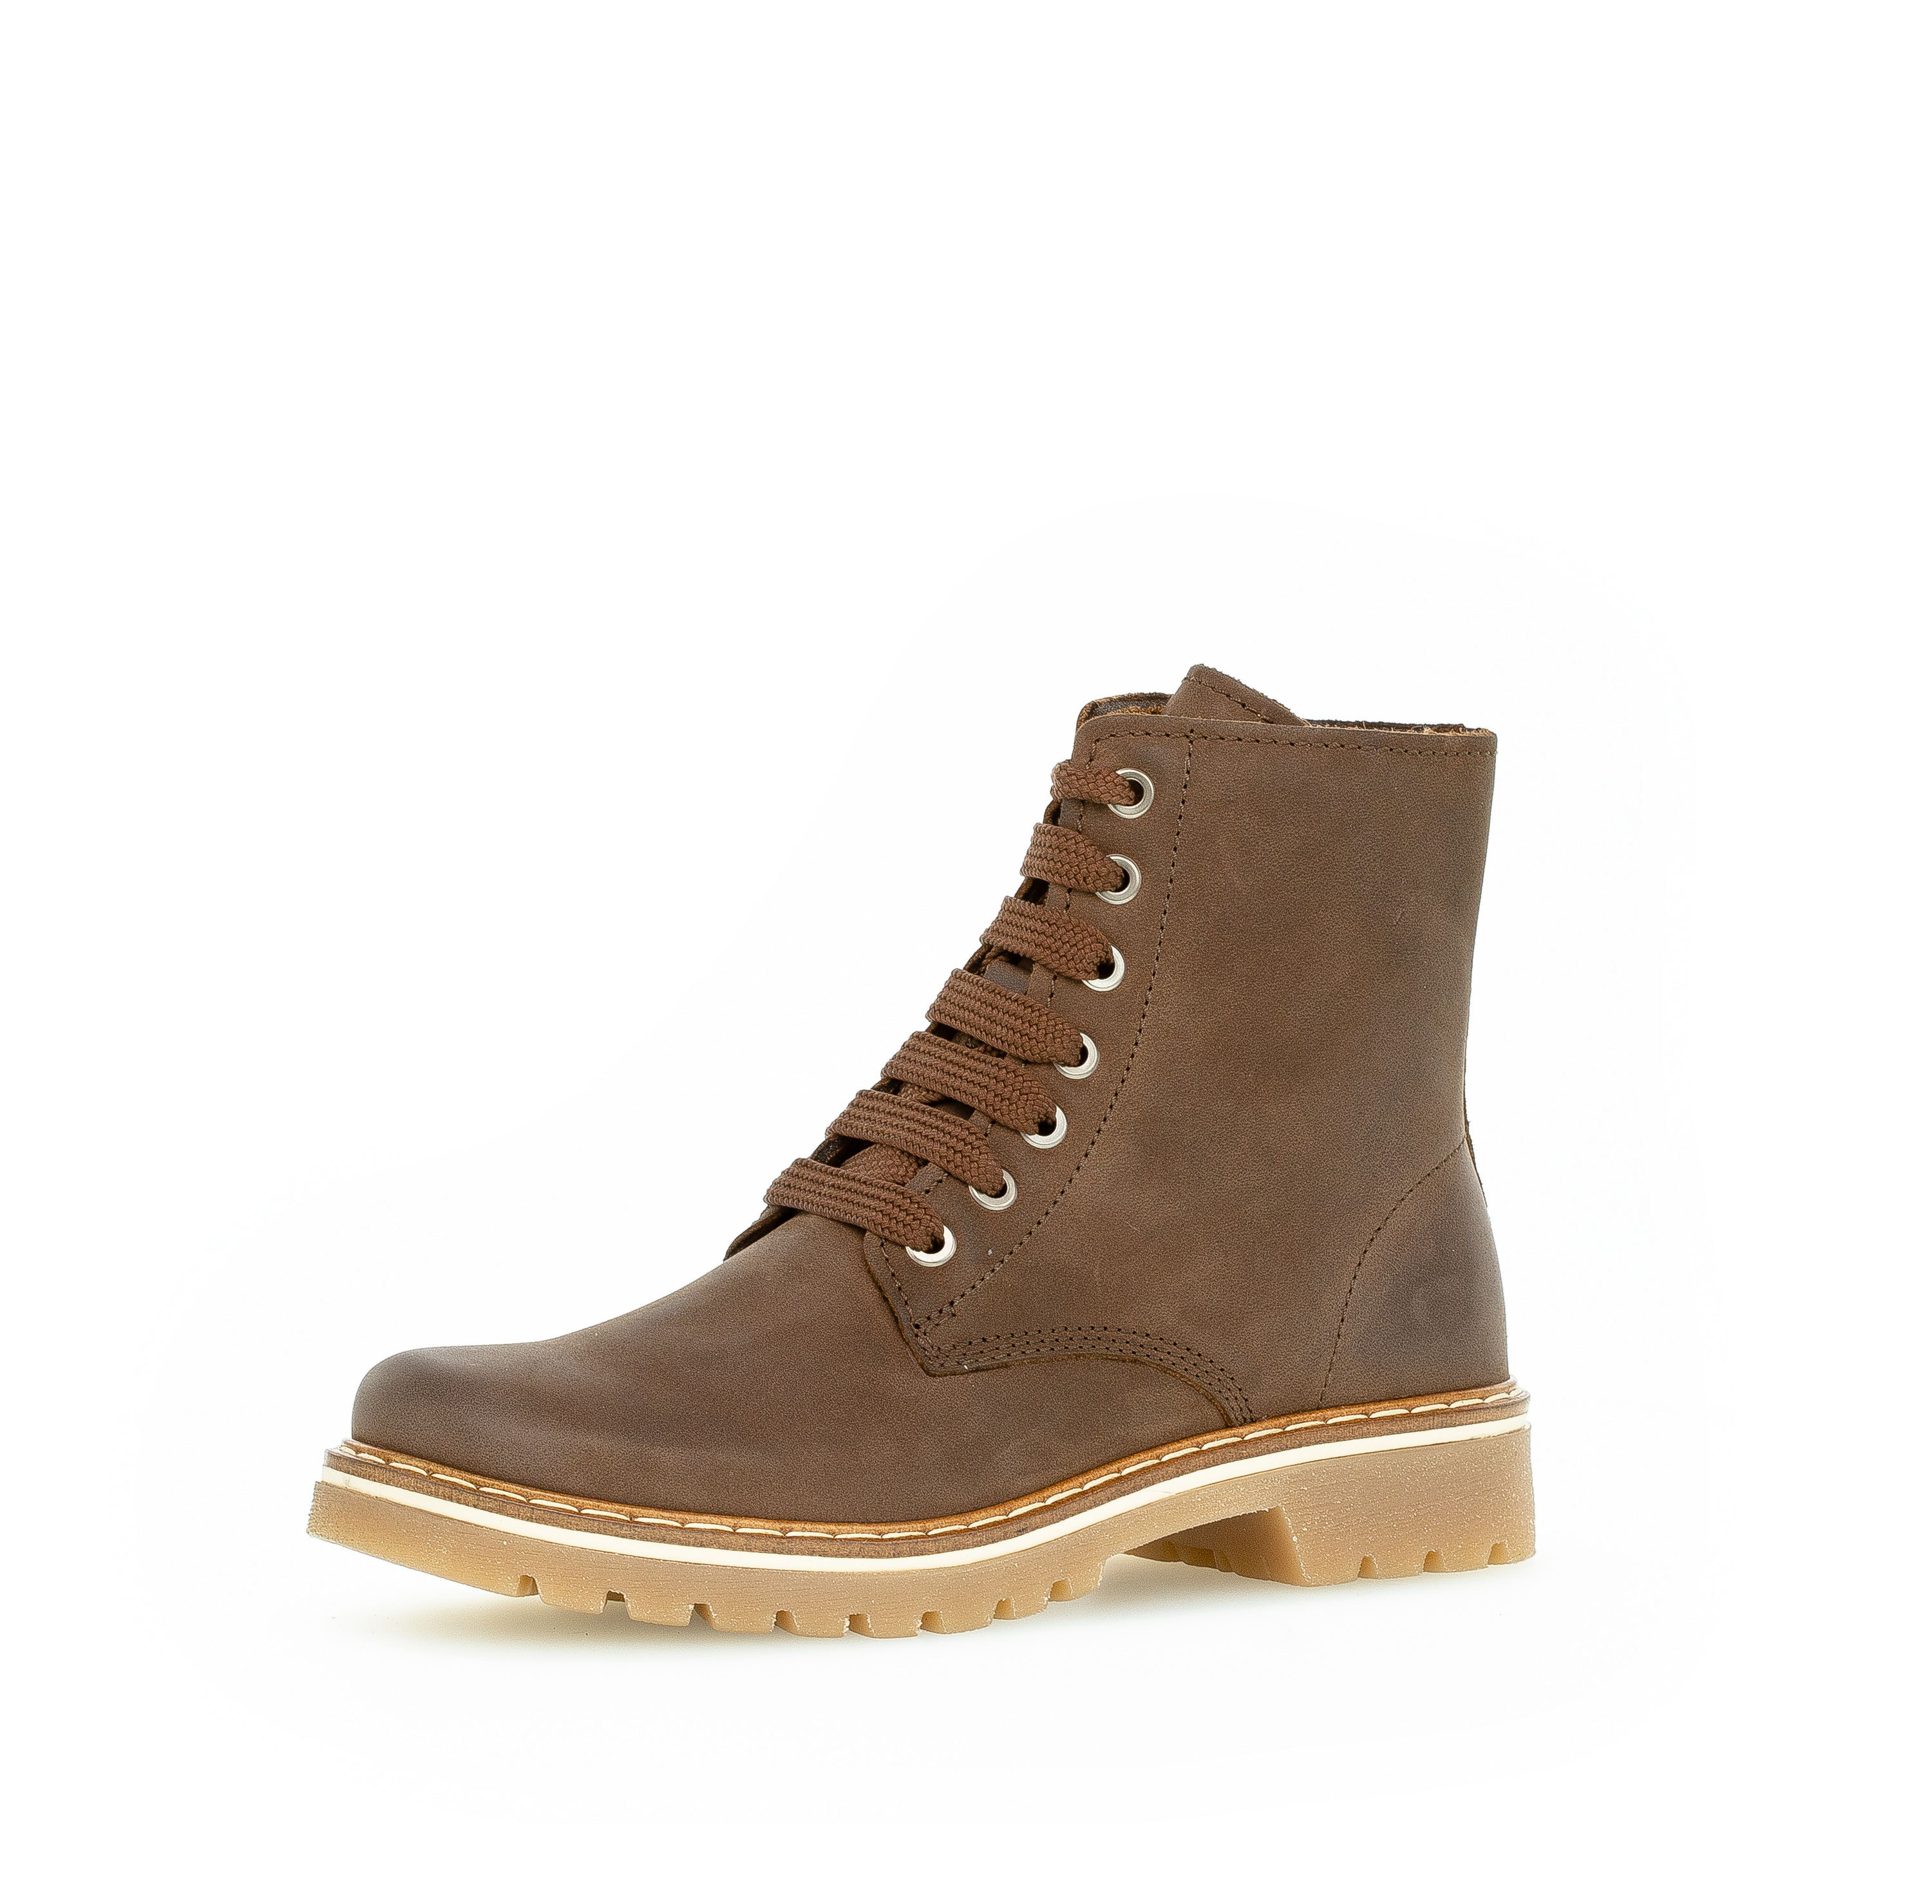 Stiefelette Brown Leather